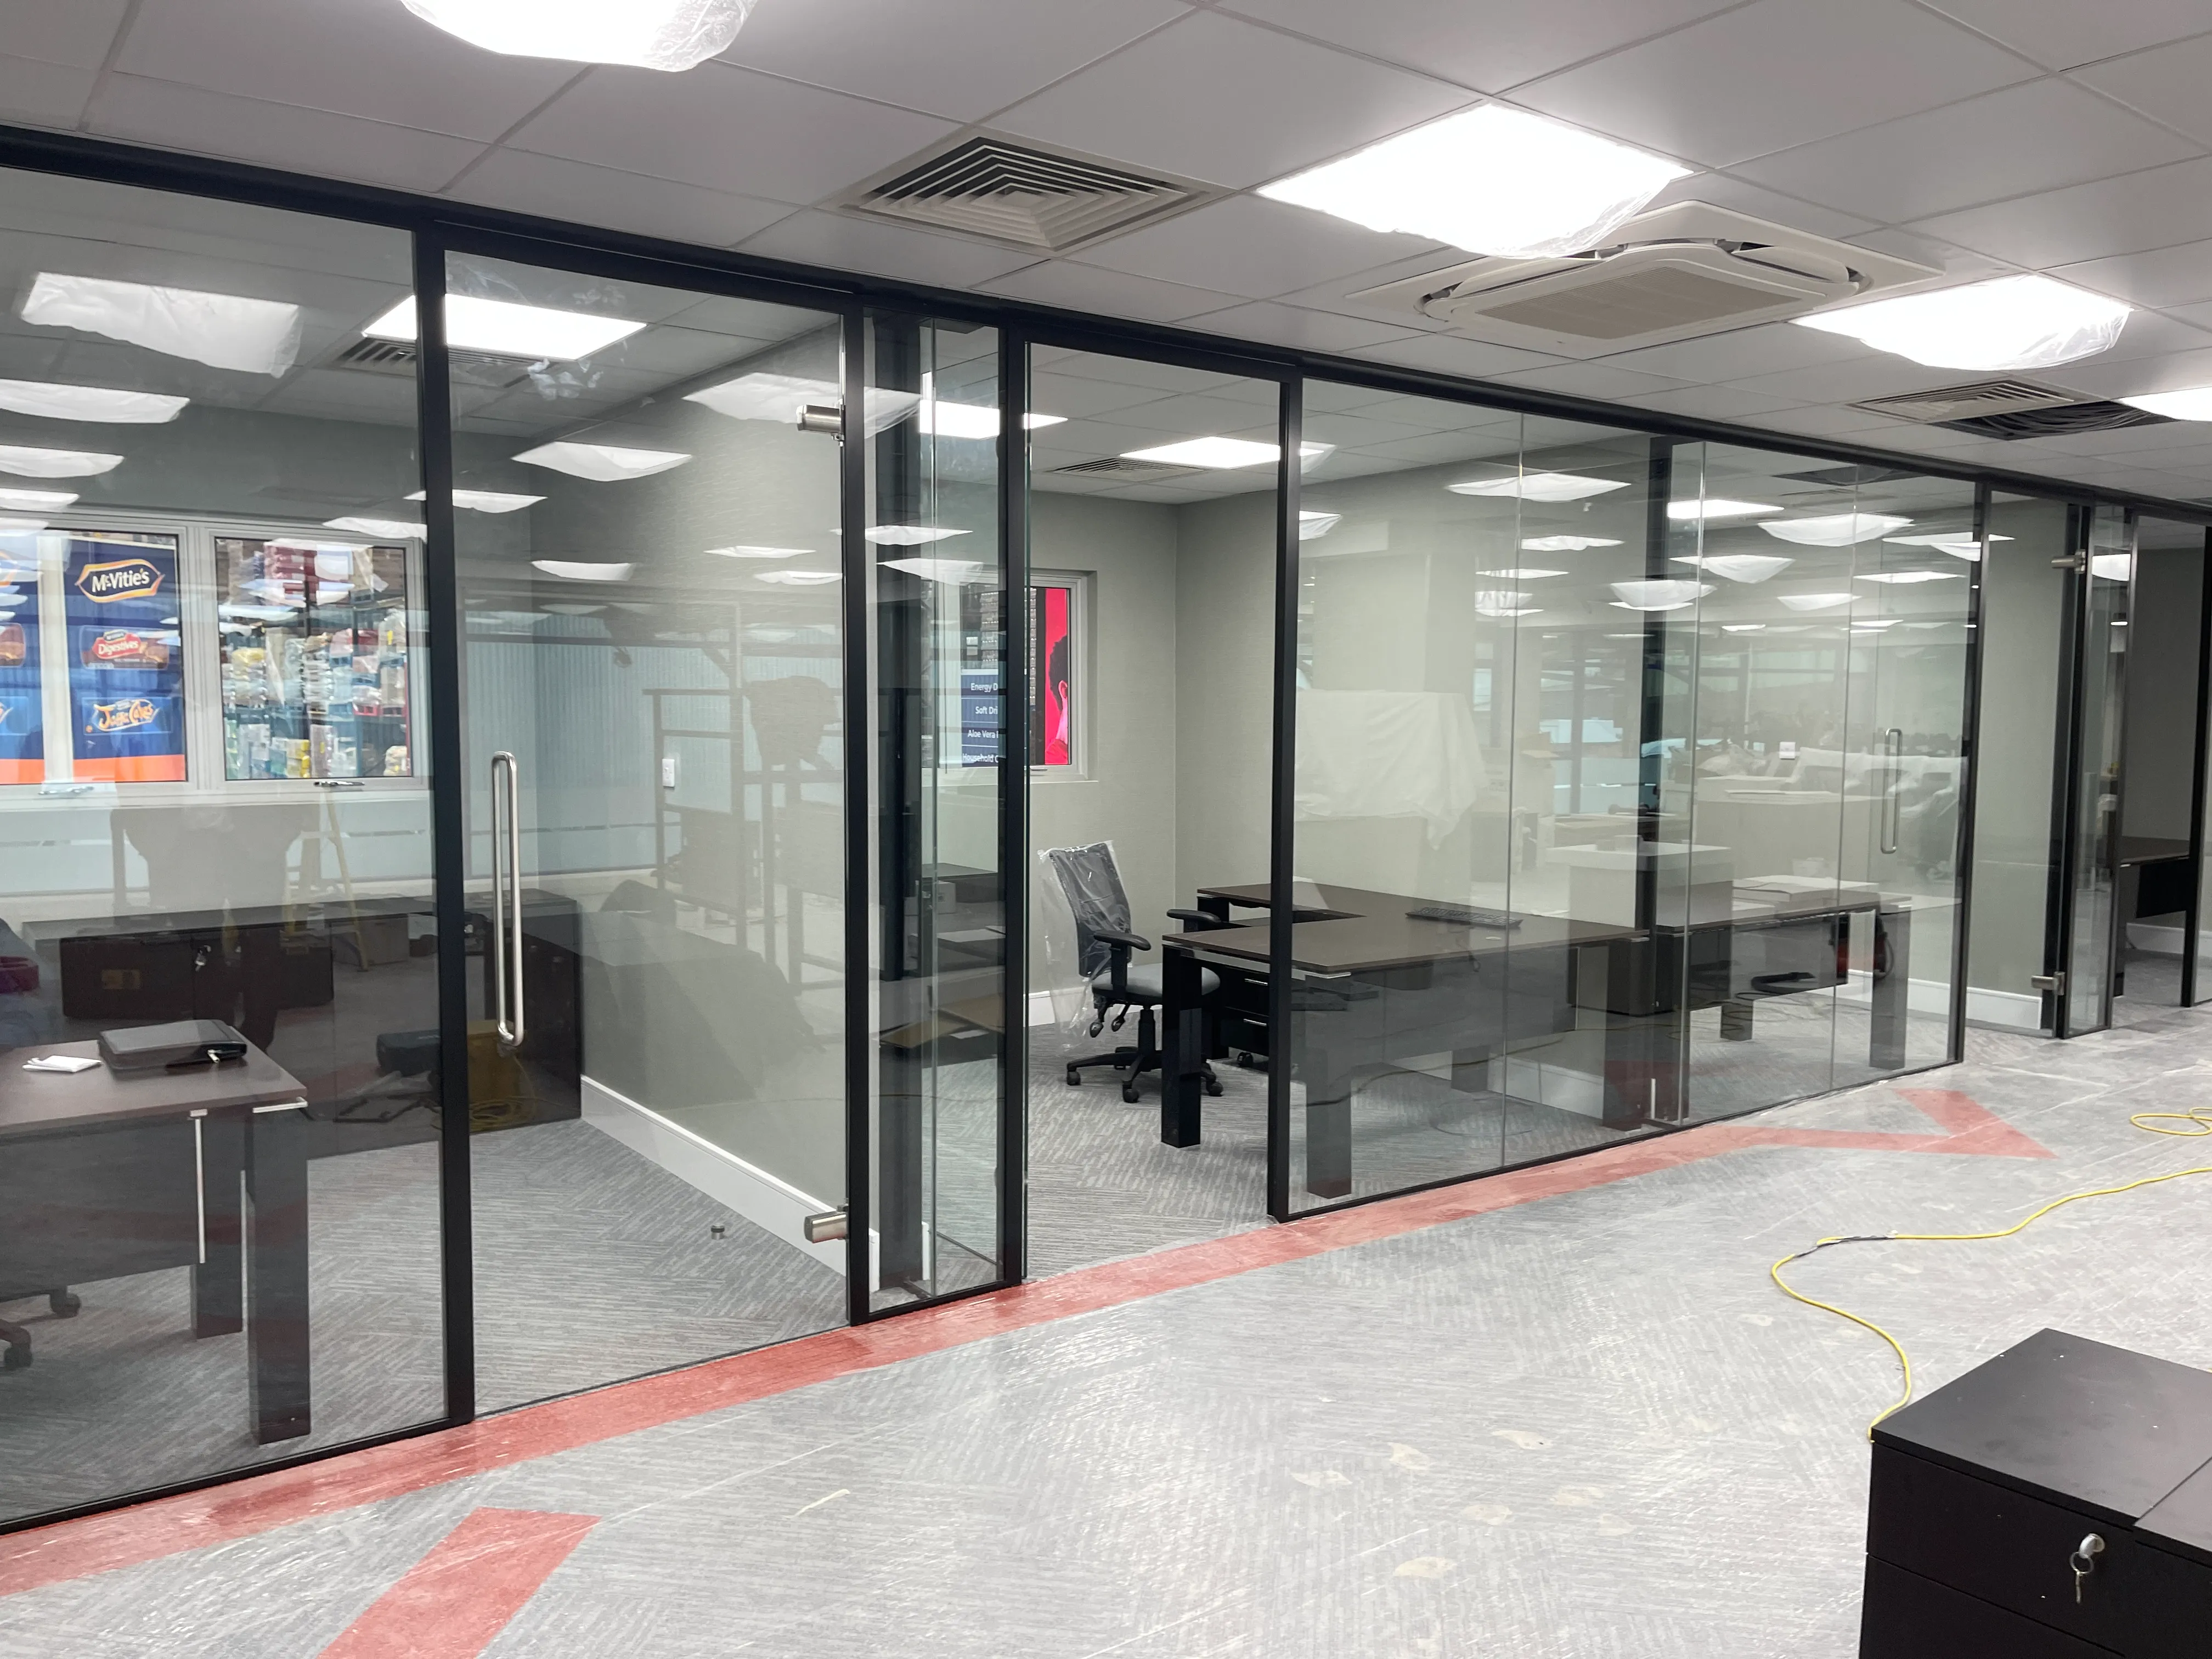 Private office workspace with black framed glass partitions